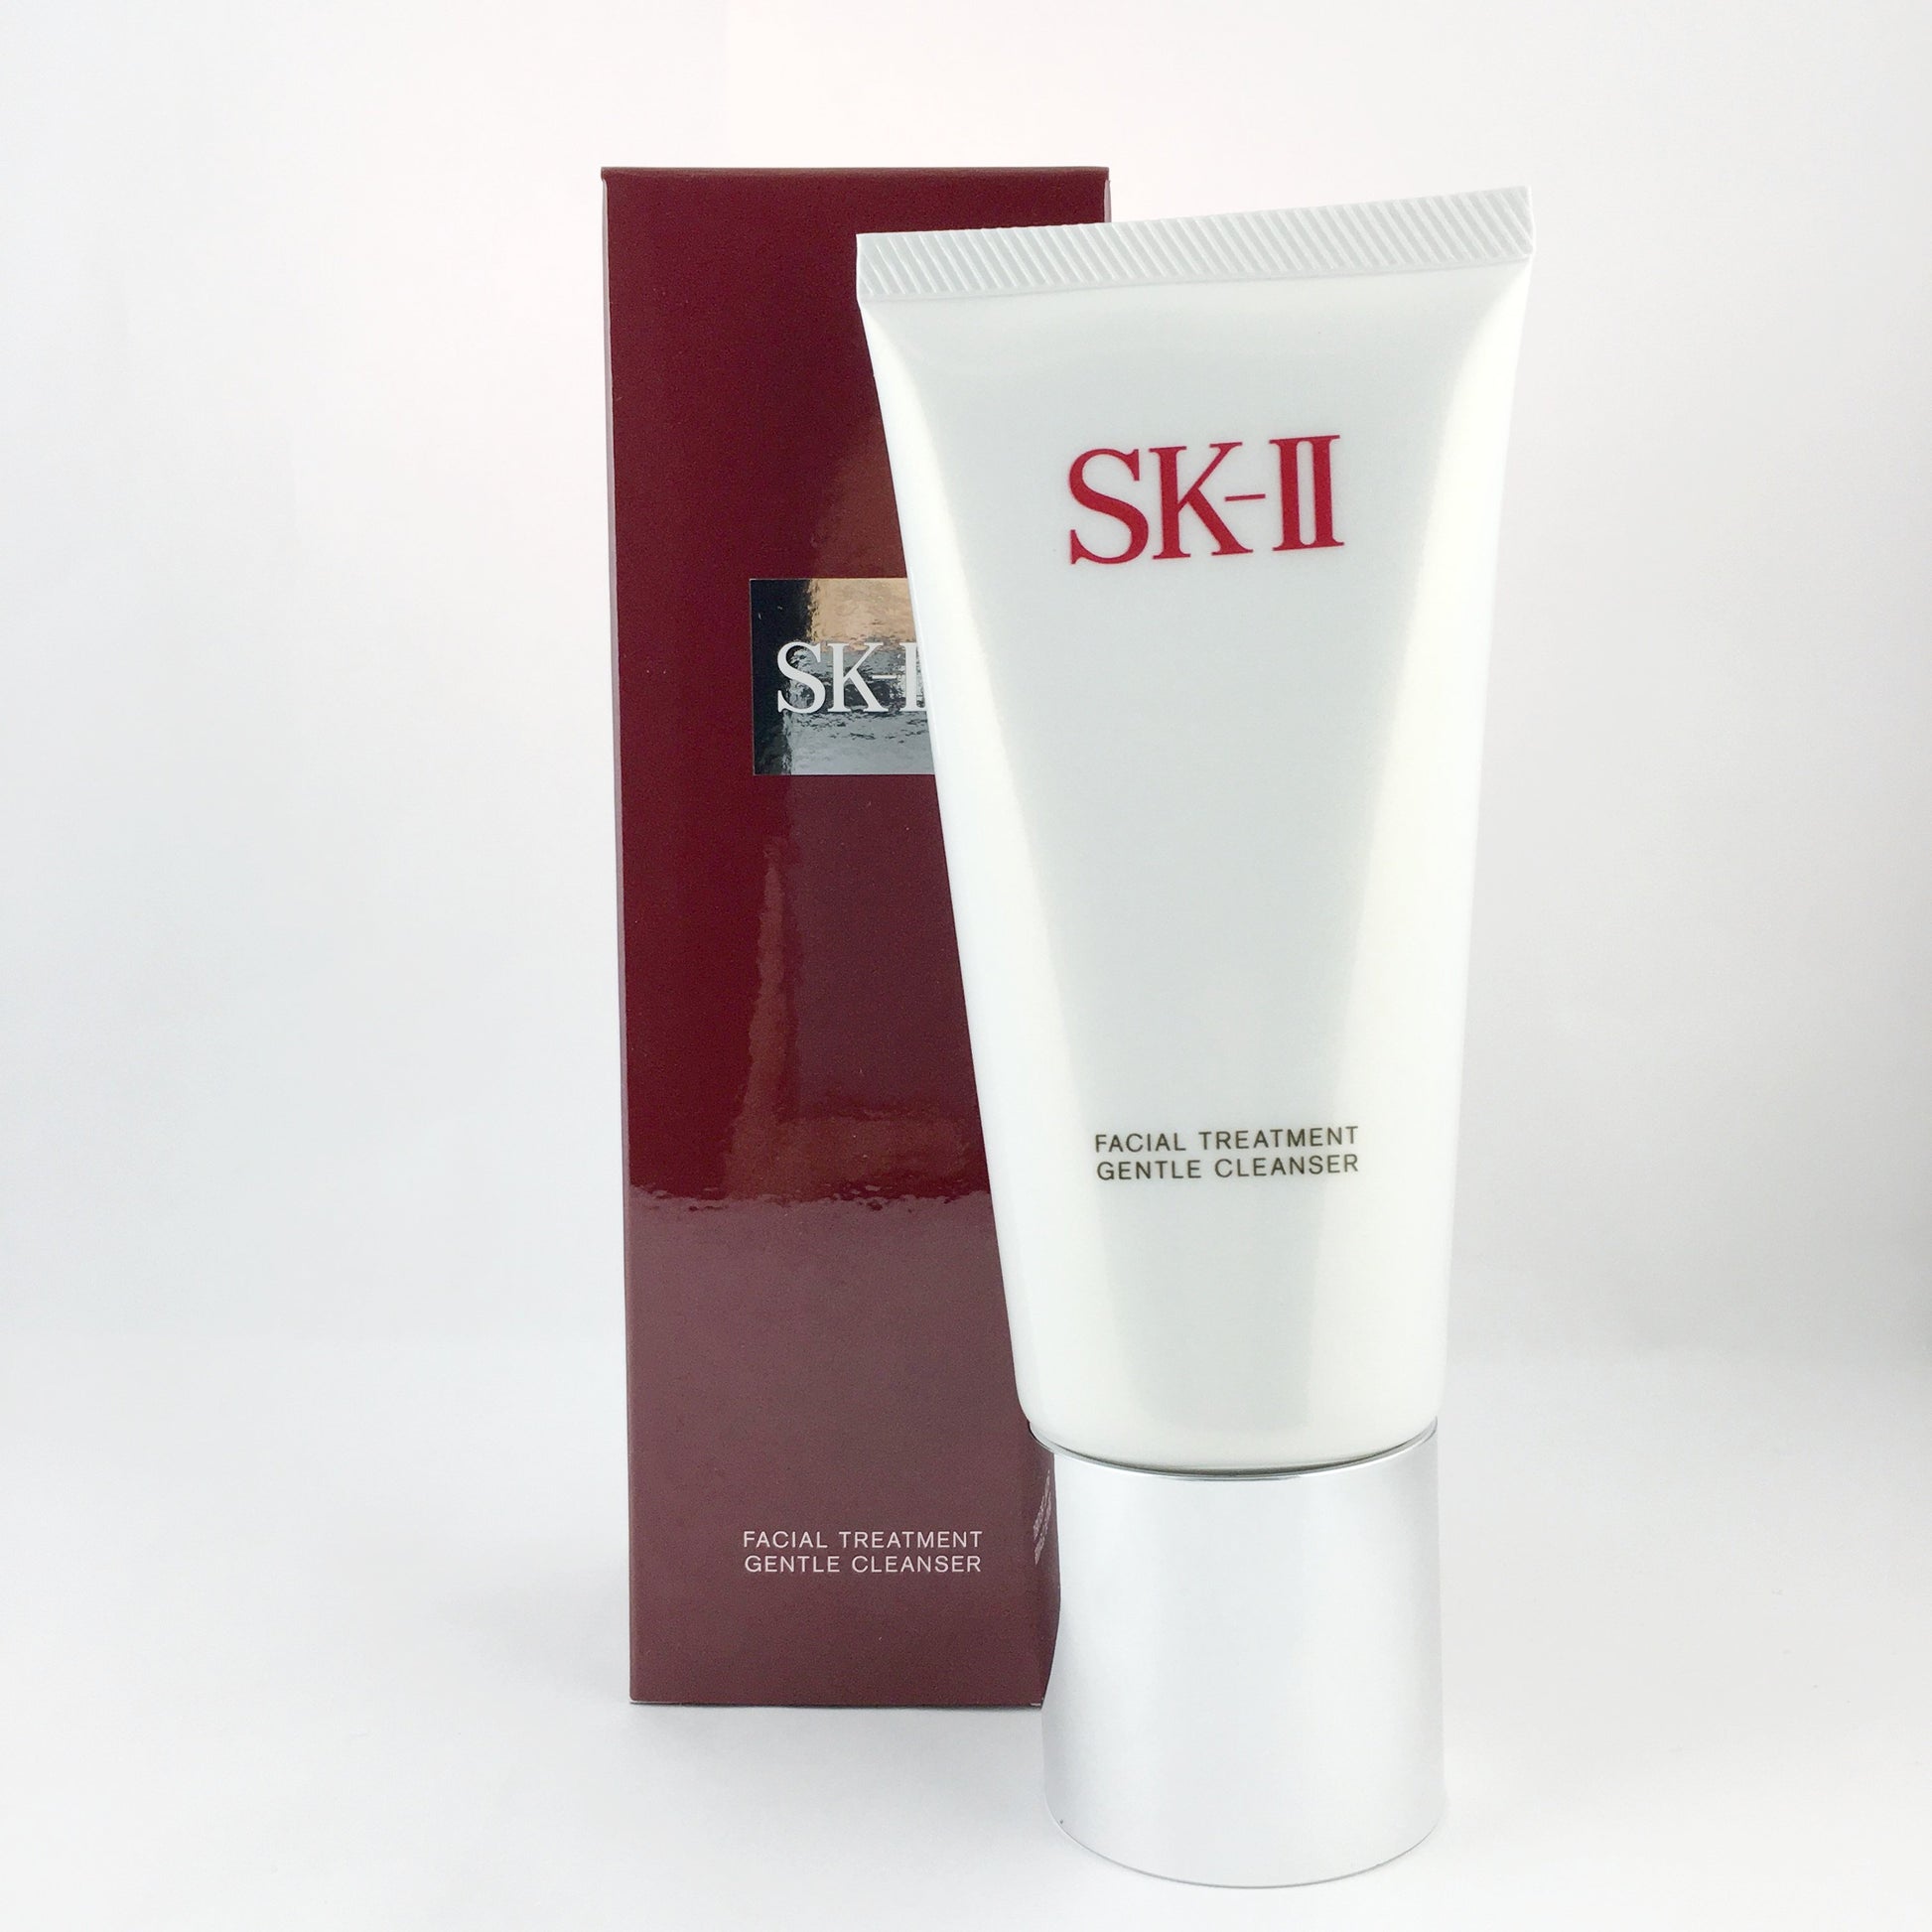 SK-II Facial Treatment Gentle Cleanser 20g or 120g.